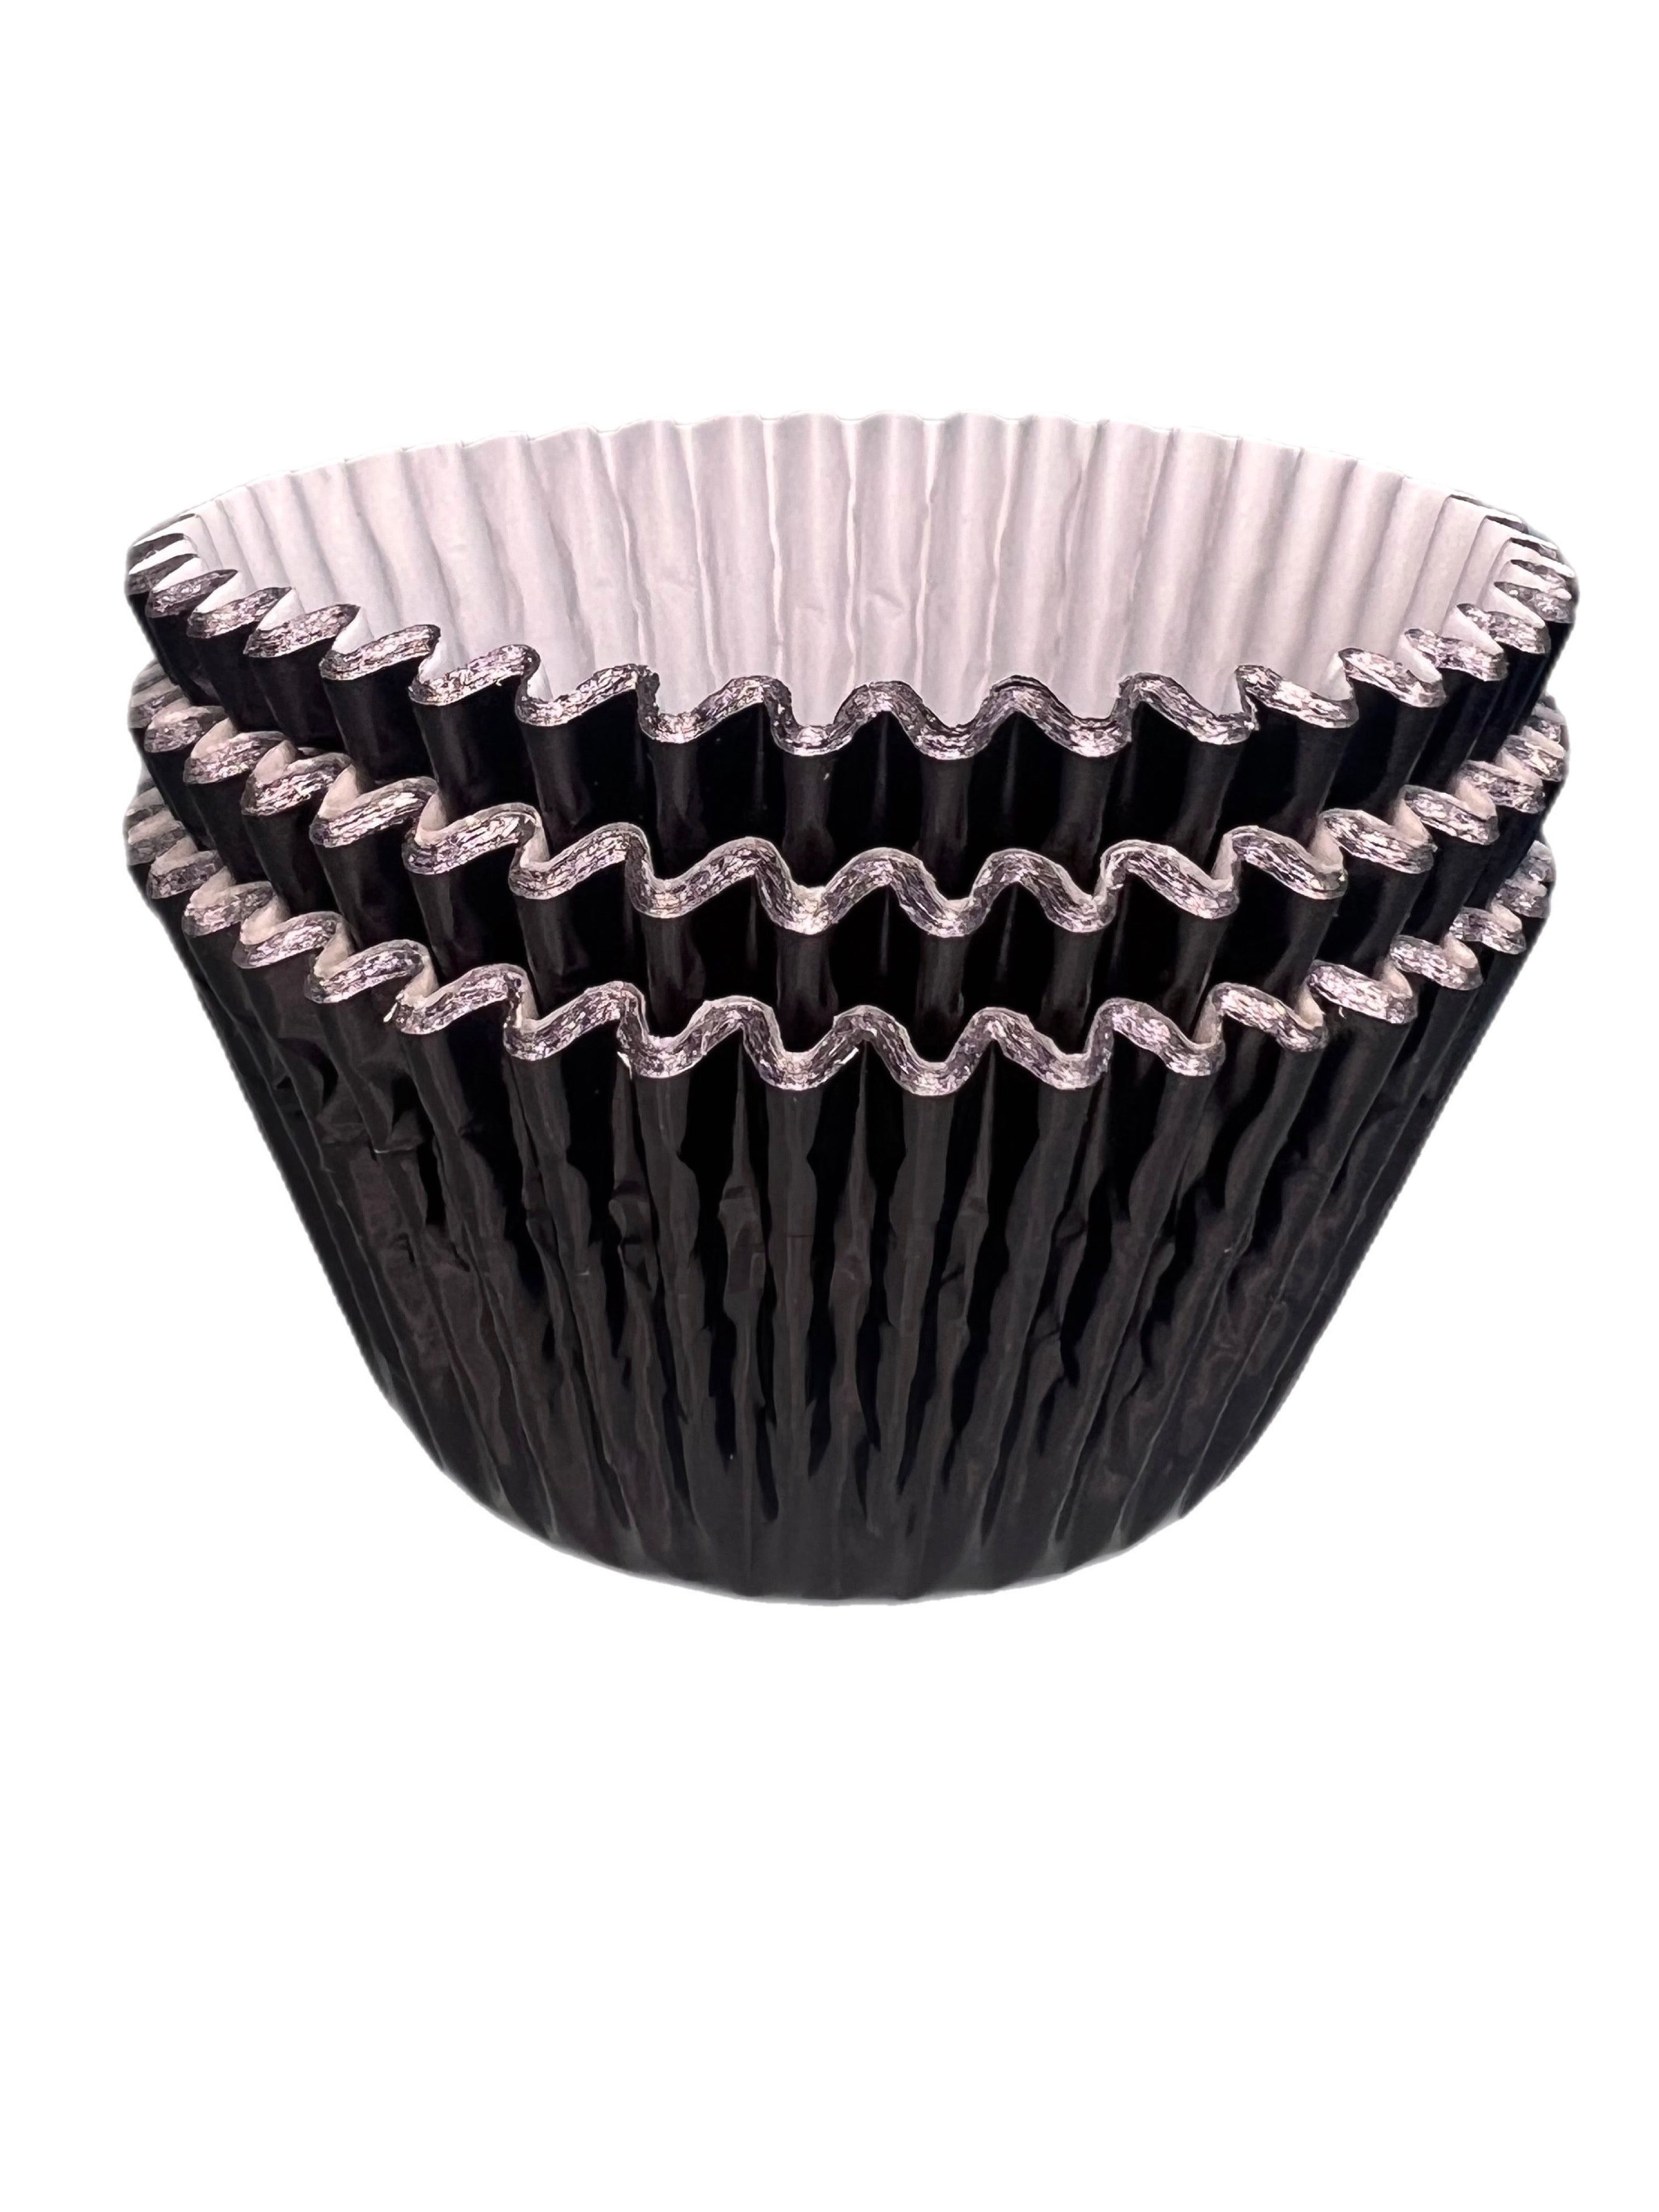 Black Foil Cupcake / Muffin Baking Cases Pack of Approx 36 - Kate's Cupboard